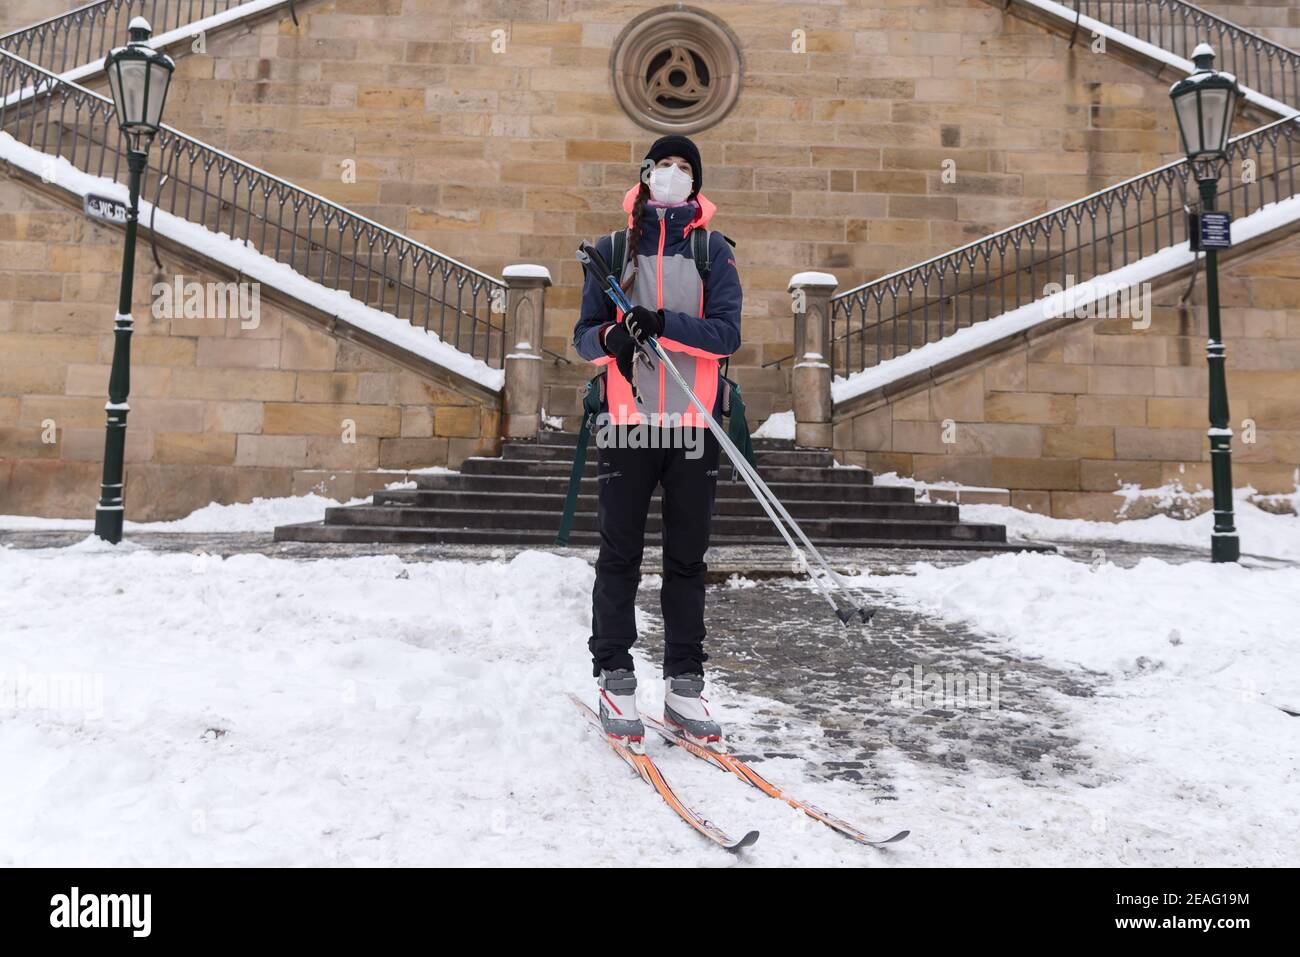 A woman, wearing a facemask as a preventive measure against the spread of coronavirus, cross-country skis under the iconic Charles Bridge.Heavy snowfall across the Czech Republic has disrupted rail, road and public transport. Stock Photo